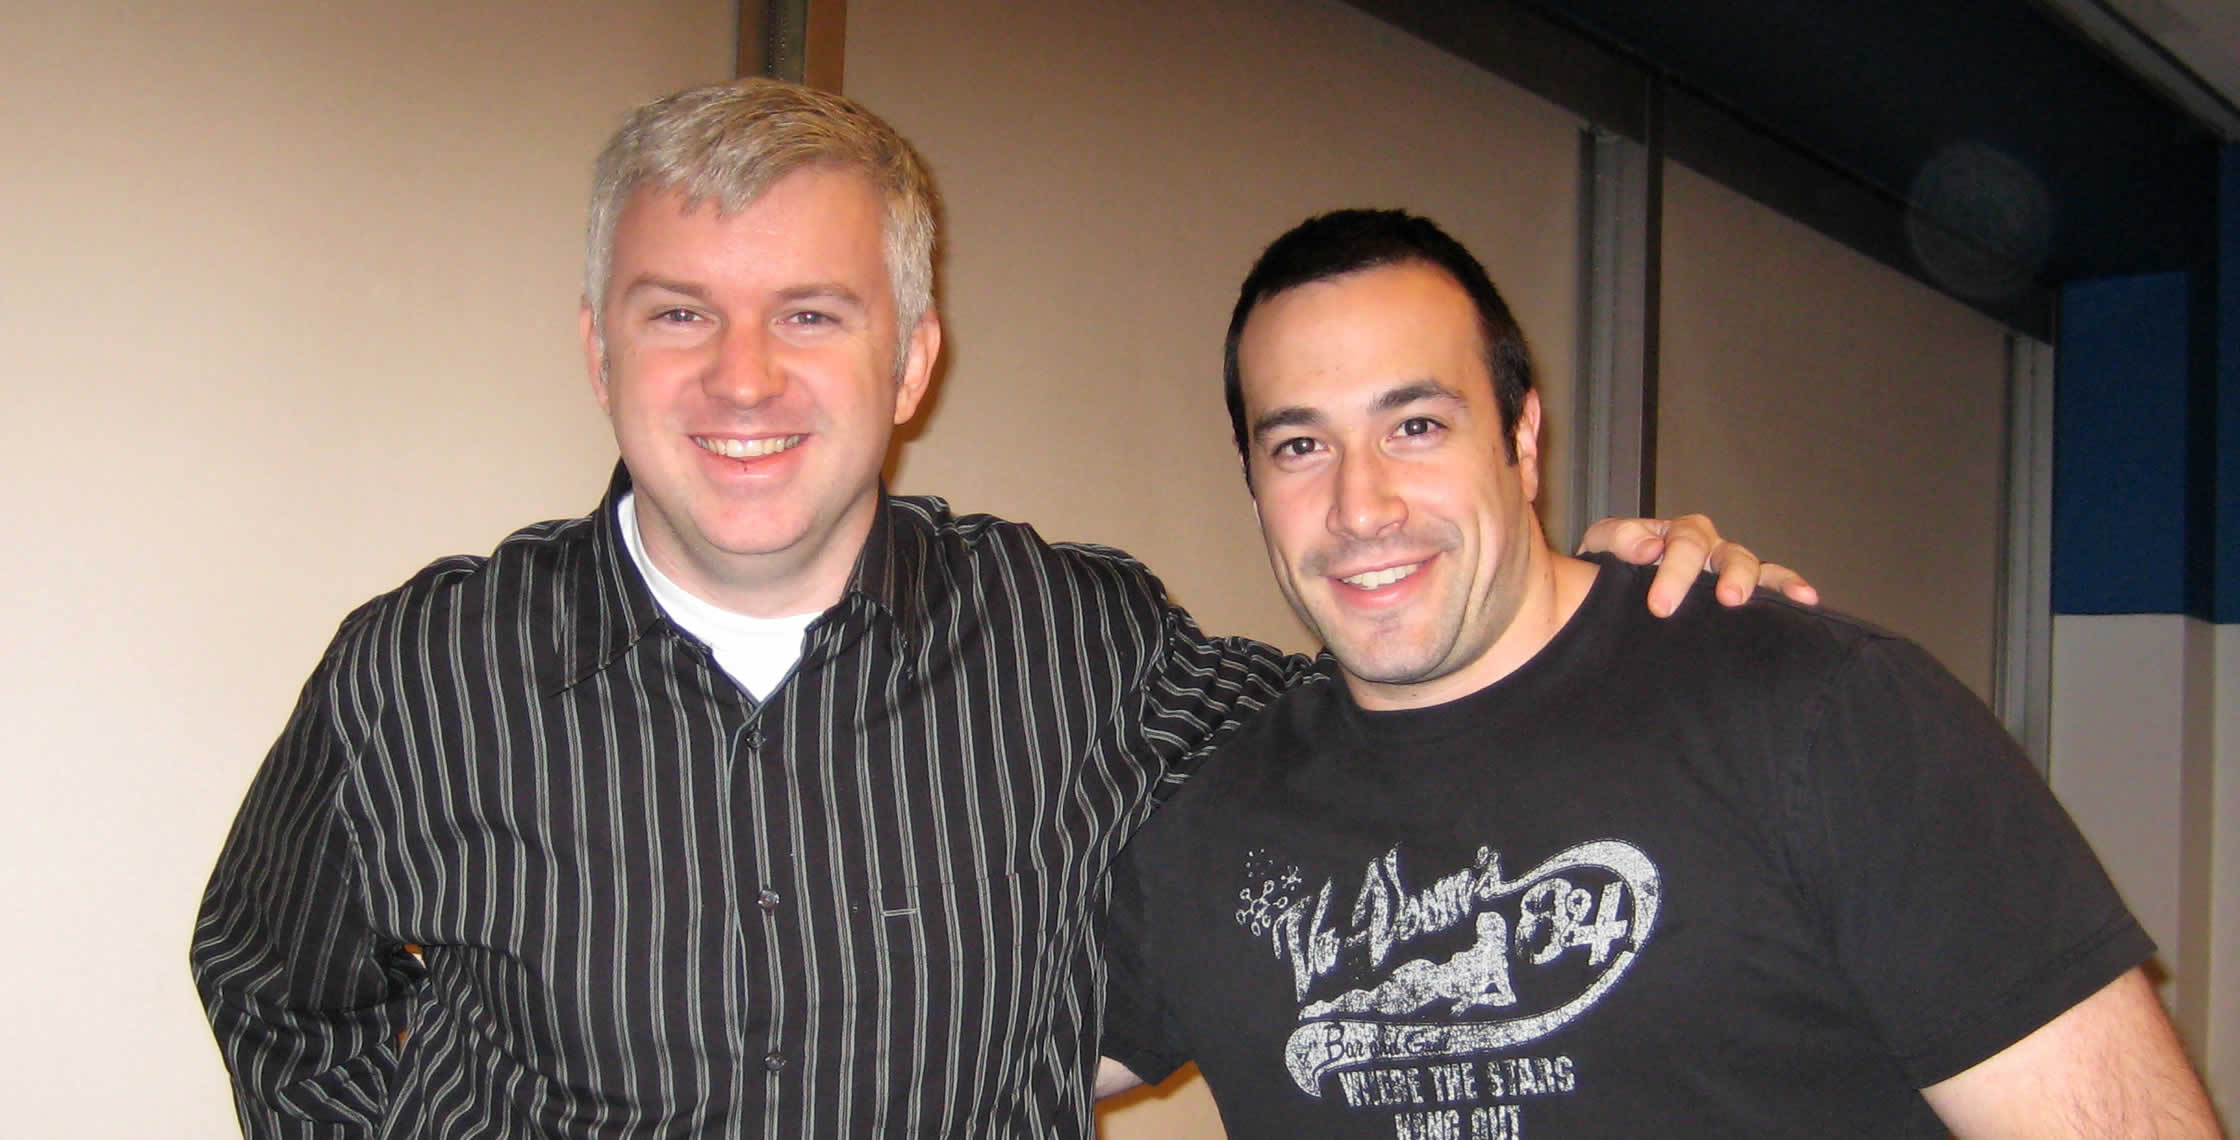 Ben Nadel at the New York ColdFusion User Group (Feb. 2008) with: Jack Welde